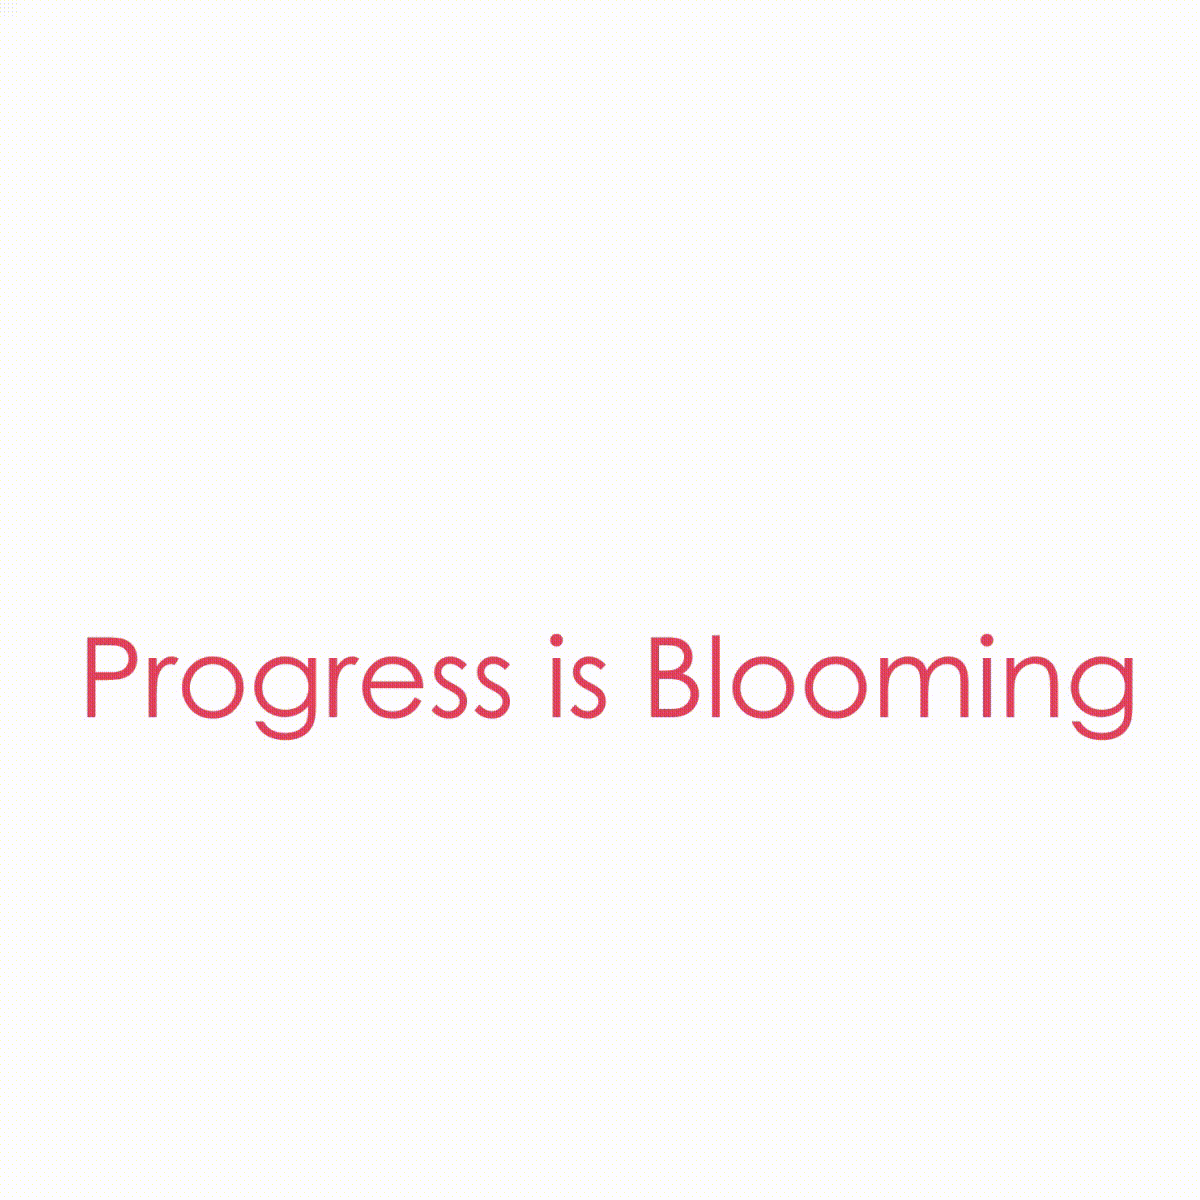 Animated Gif with still text saying "Progress is Blooming," where green, blue and purple jungle leaves and flowers sprout around the word "Fuse."